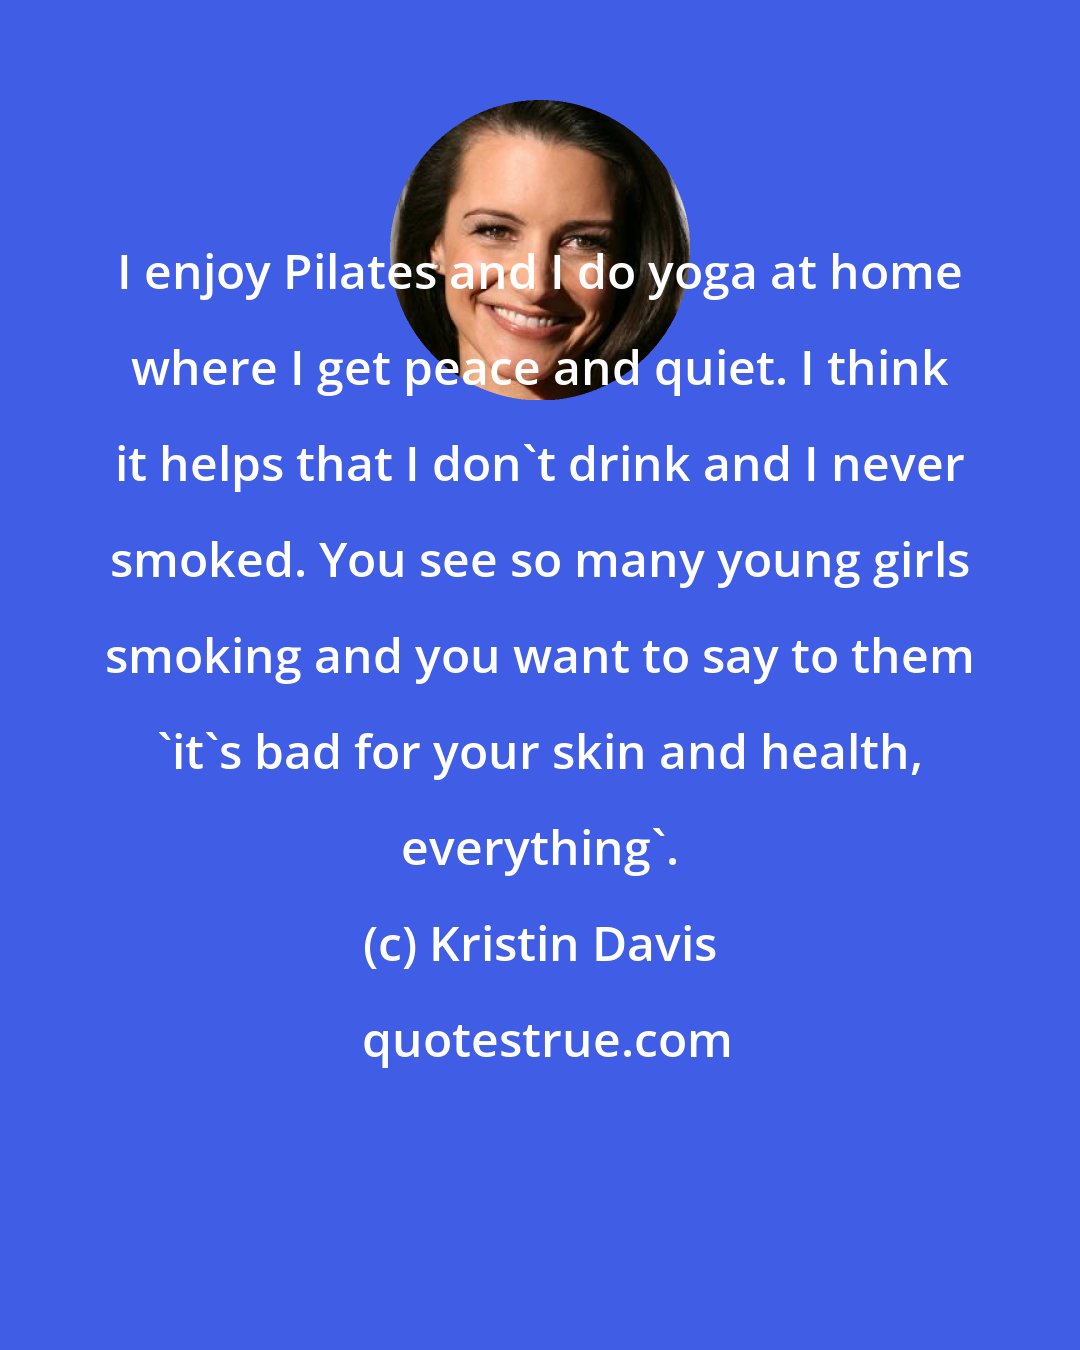 Kristin Davis: I enjoy Pilates and I do yoga at home where I get peace and quiet. I think it helps that I don't drink and I never smoked. You see so many young girls smoking and you want to say to them 'it's bad for your skin and health, everything'.